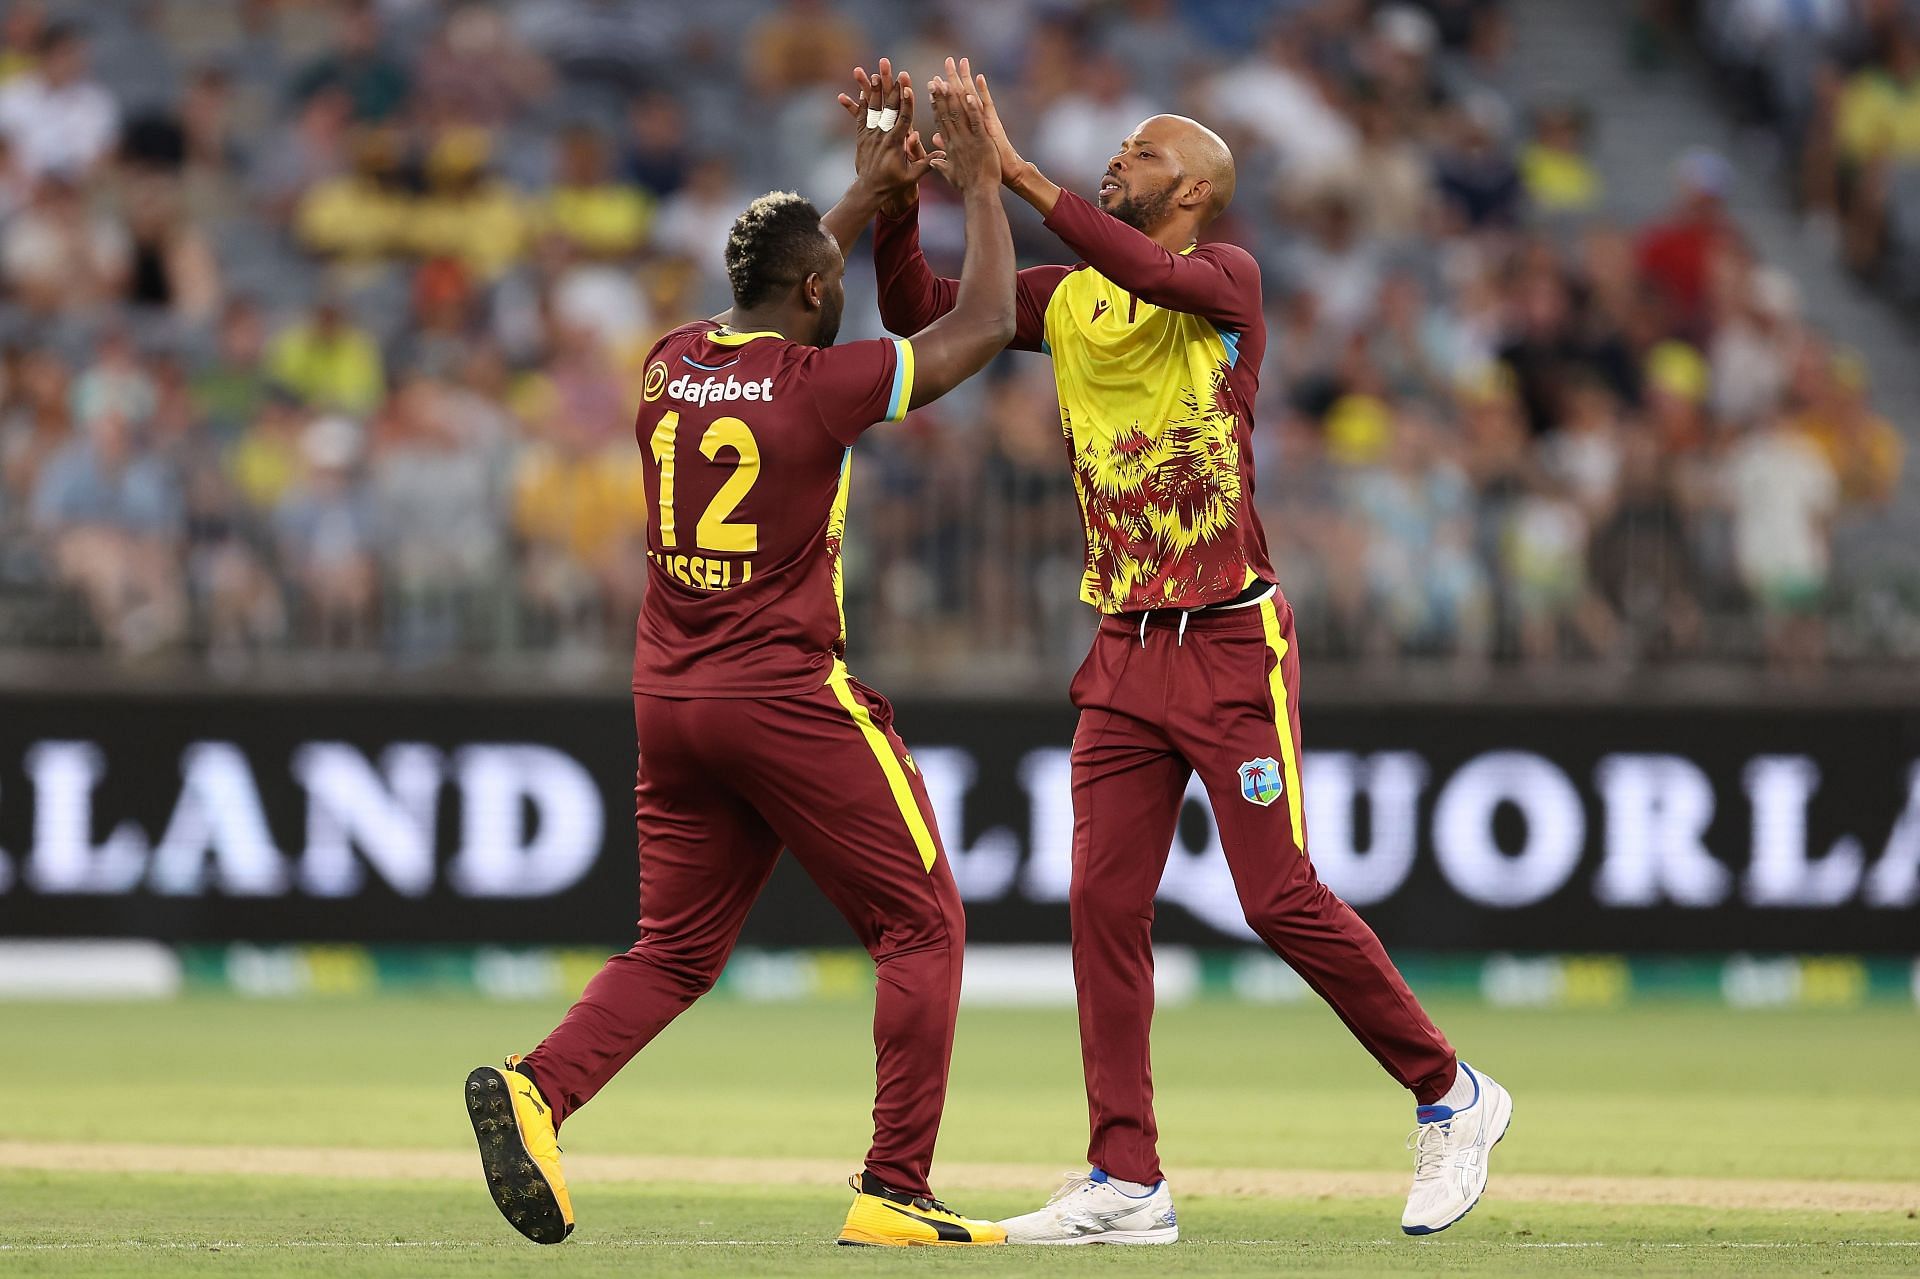 West Indies have been in excellent recent form in the shortest format.